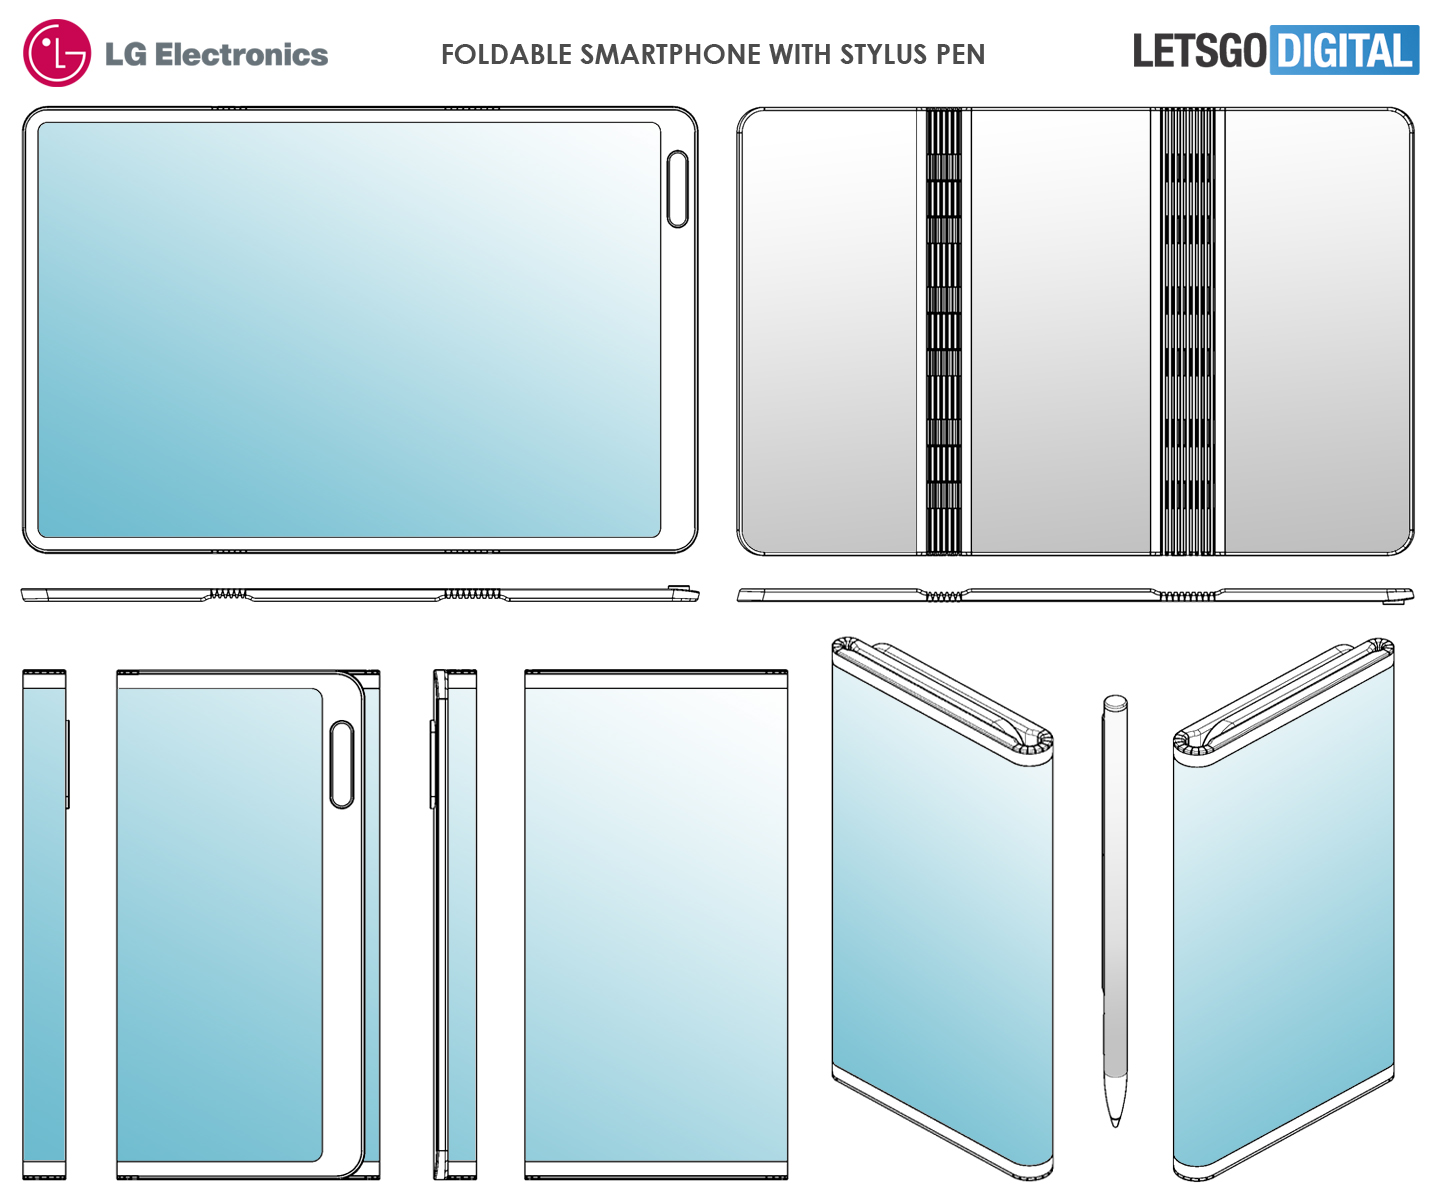 lg foldable device patent schematic